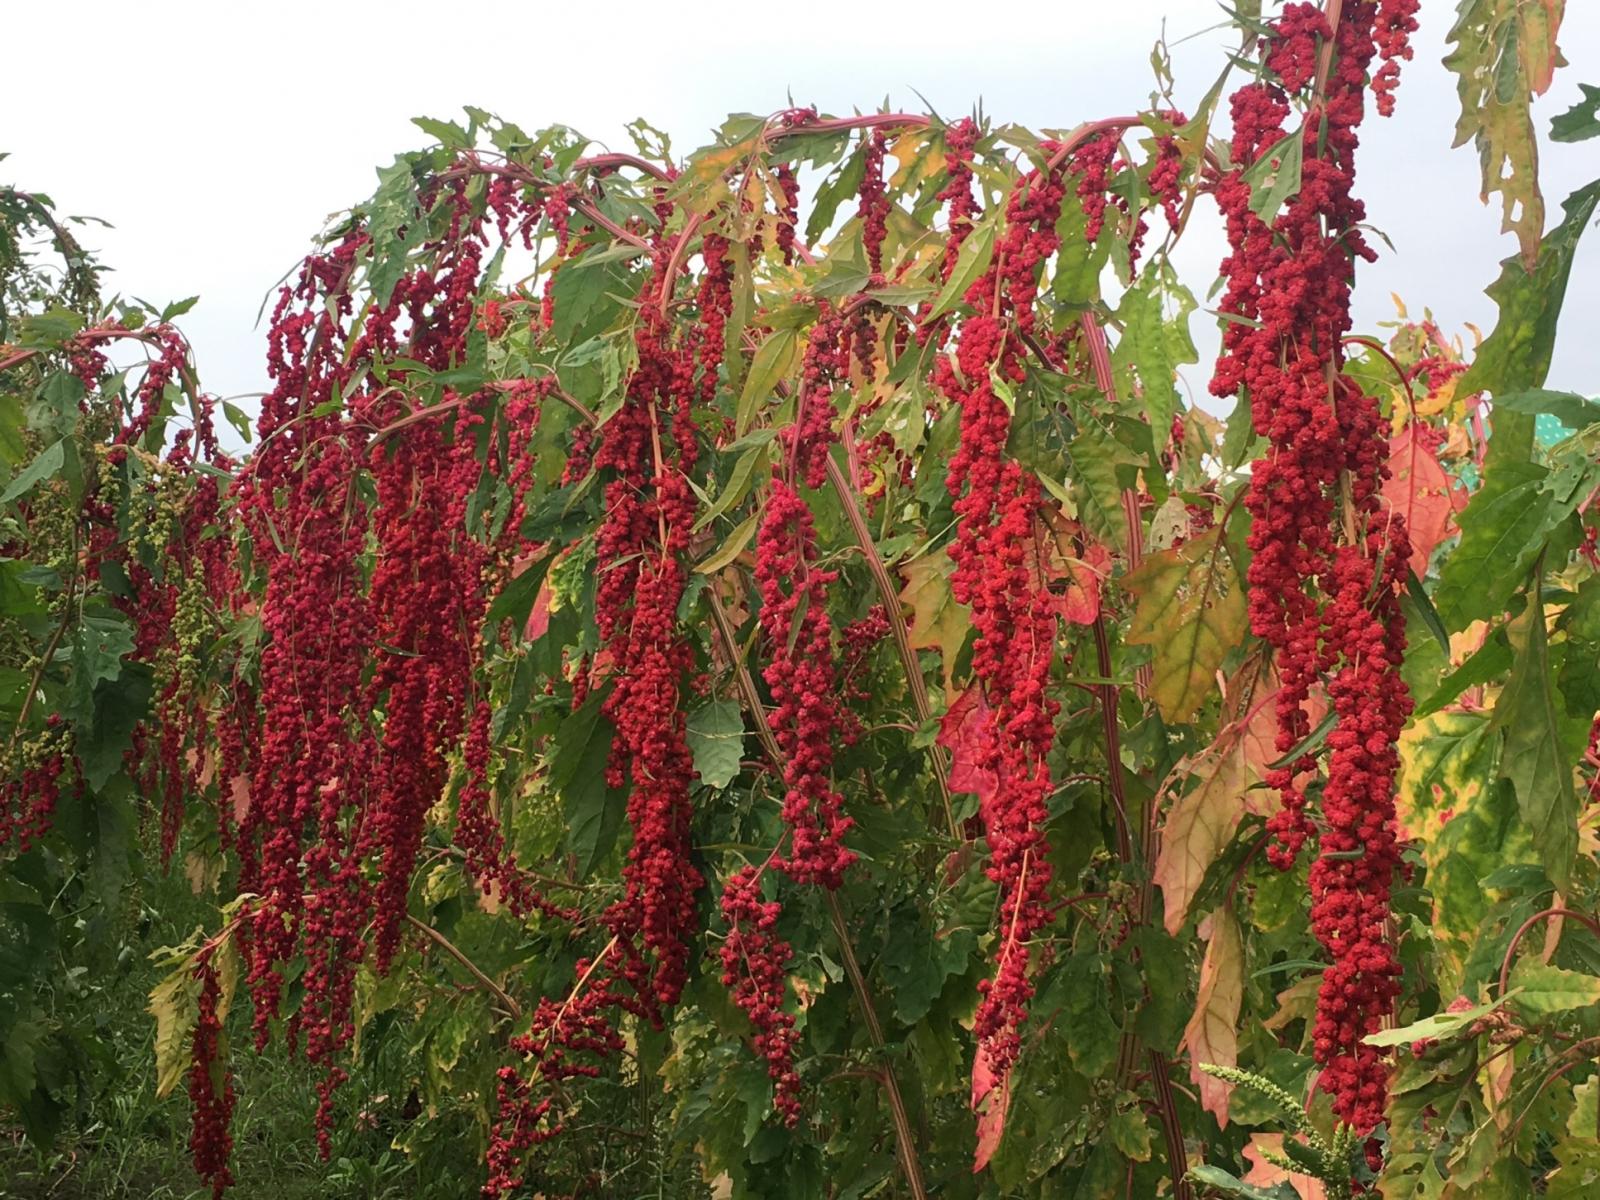 Djulis Taitung No. 1 has red panicle, which are the major market trend.